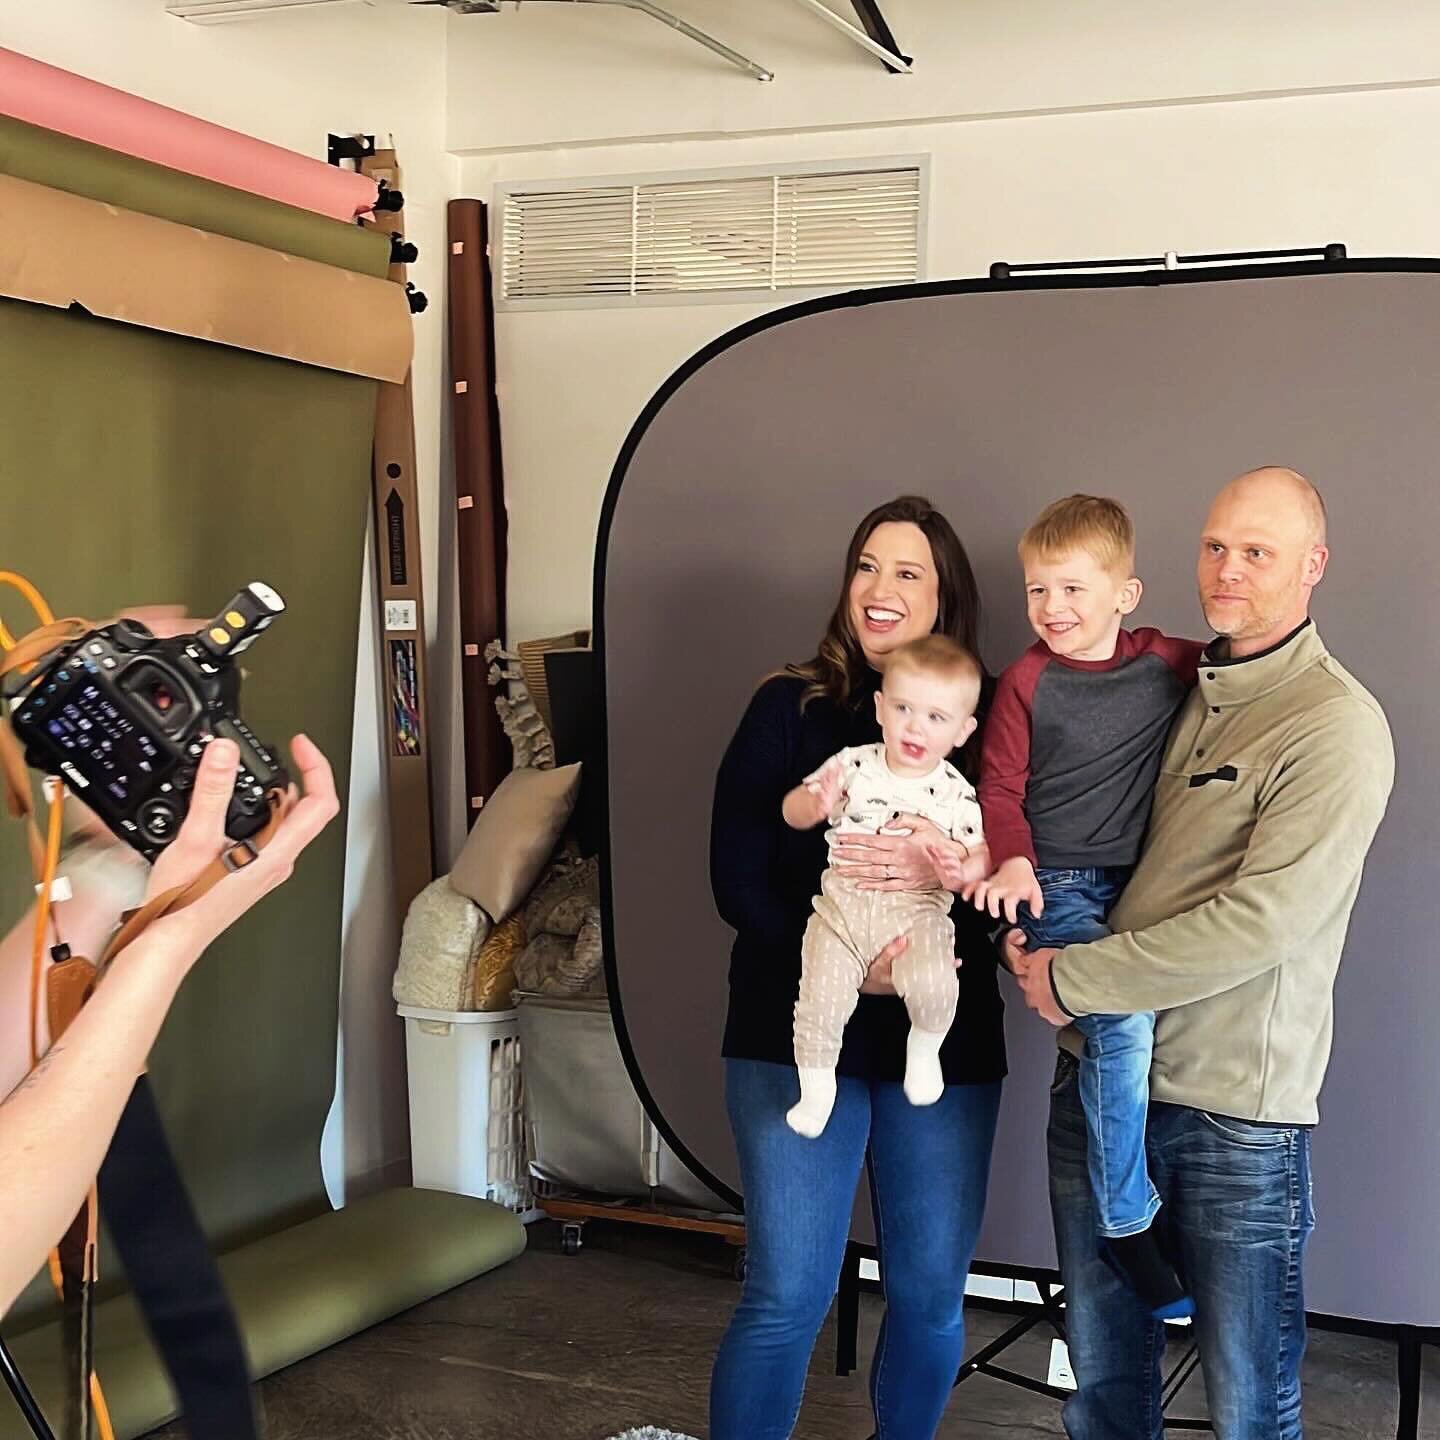 Thank you to all the families who stopped by the studio today for Picture Day Pop Ups!

You can always be the first to hear about Pop Ups by joining the Slow Road Family List (link in bio). ✨✨